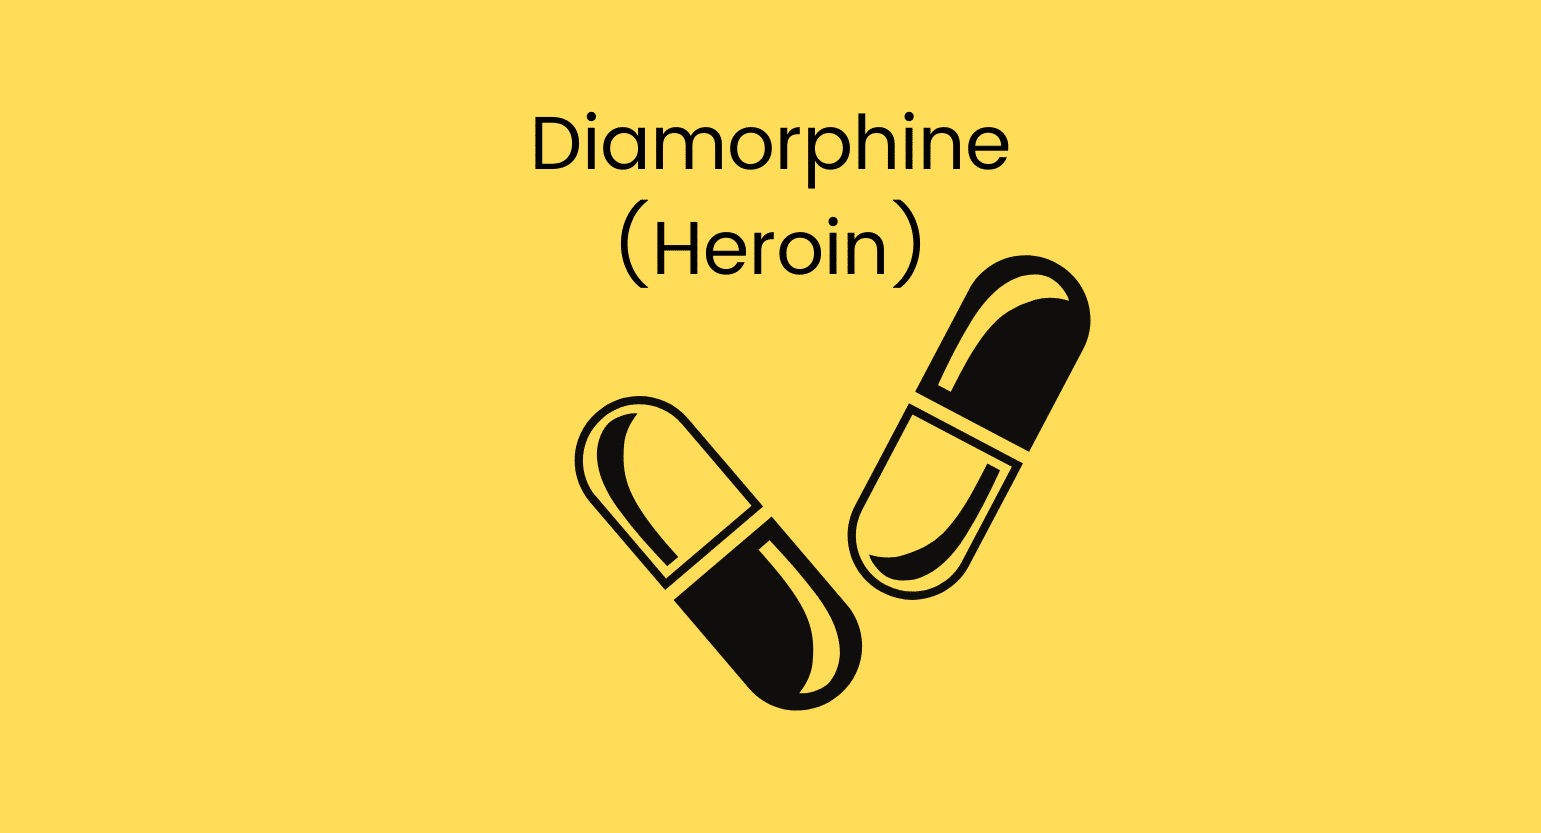 Why It’s Extremely Dangerous To Mix Kratom With Heroin (Diamorphine)